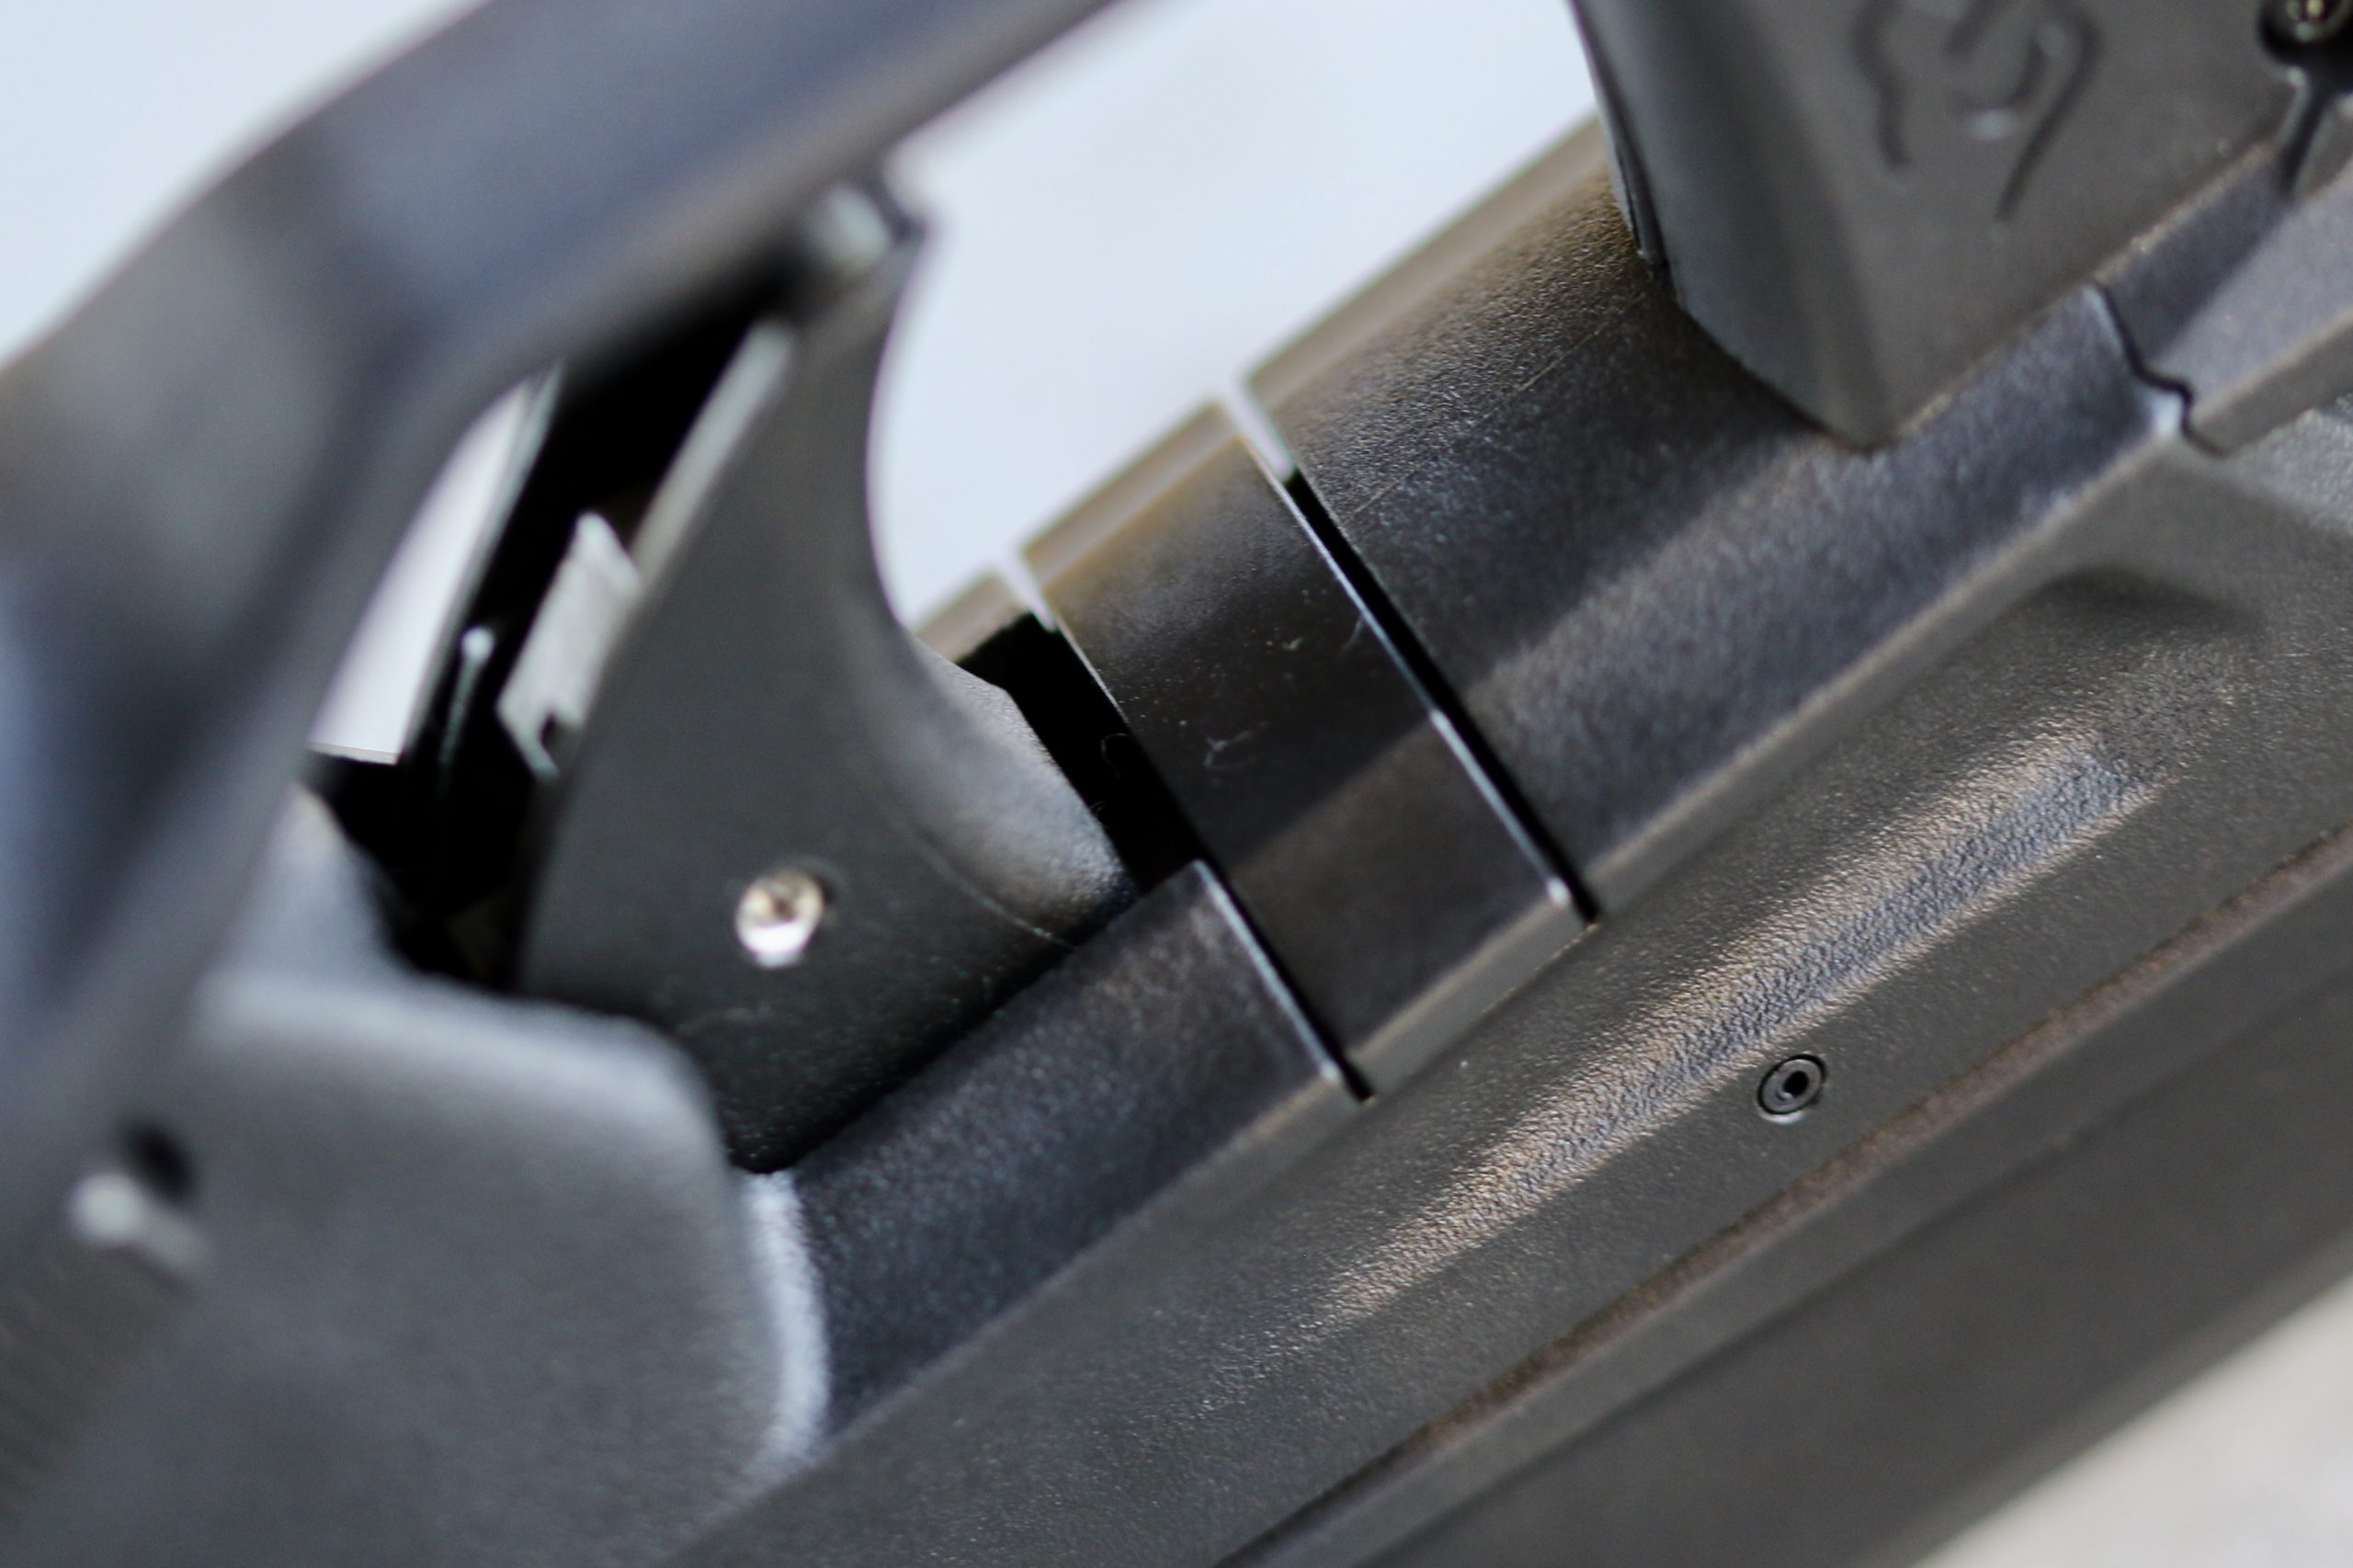 Taurus TX 22 take-down lever under the trigger guard